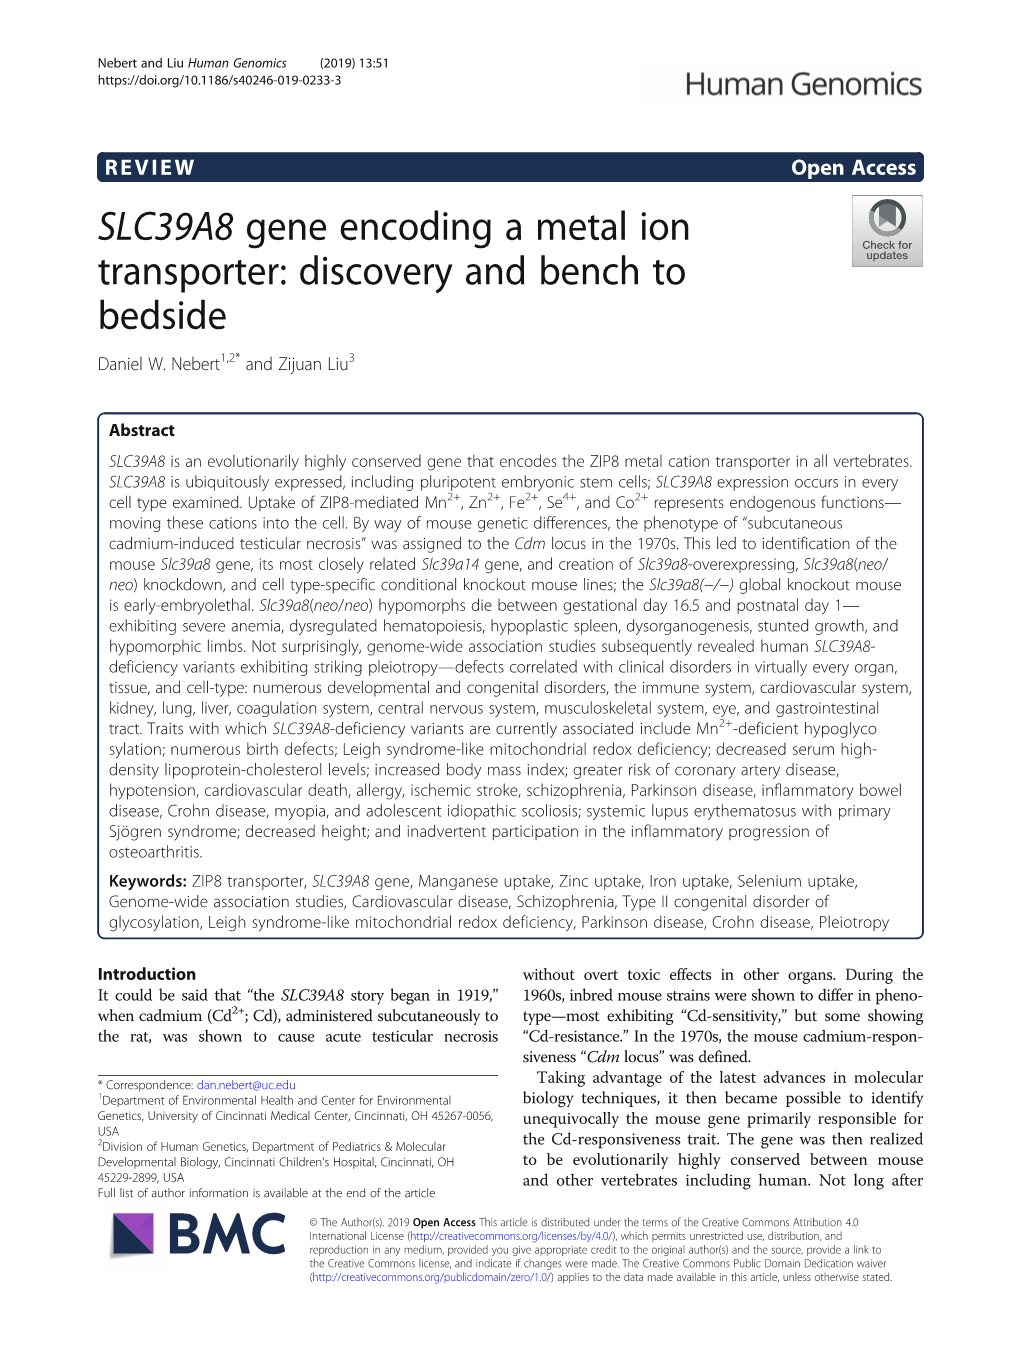 SLC39A8 Gene Encoding a Metal Ion Transporter: Discovery and Bench to Bedside Daniel W